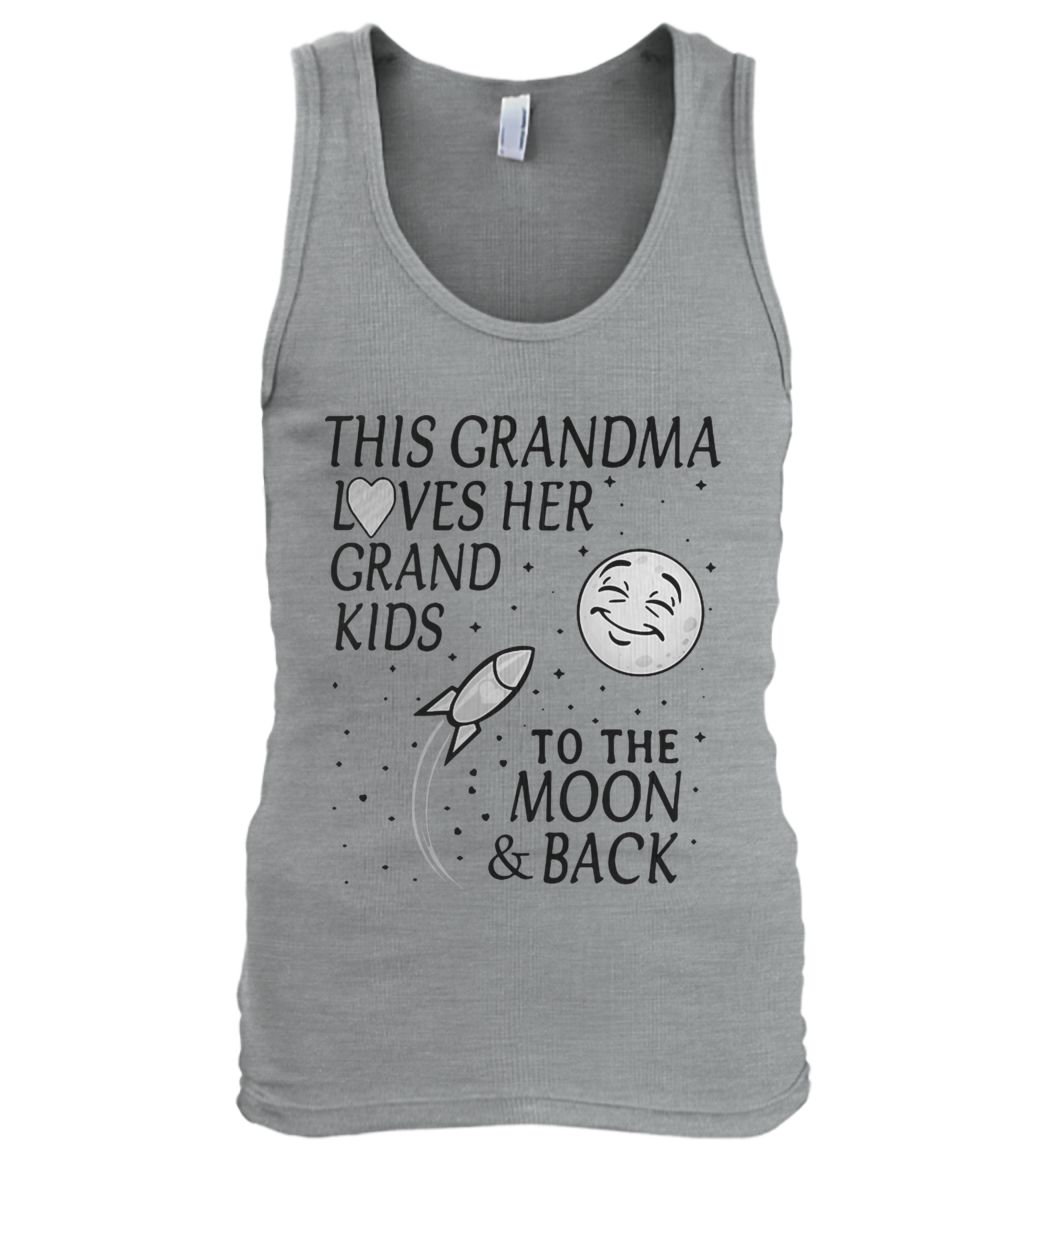 This grandma loves her grandkids to the moon and back men's tank top